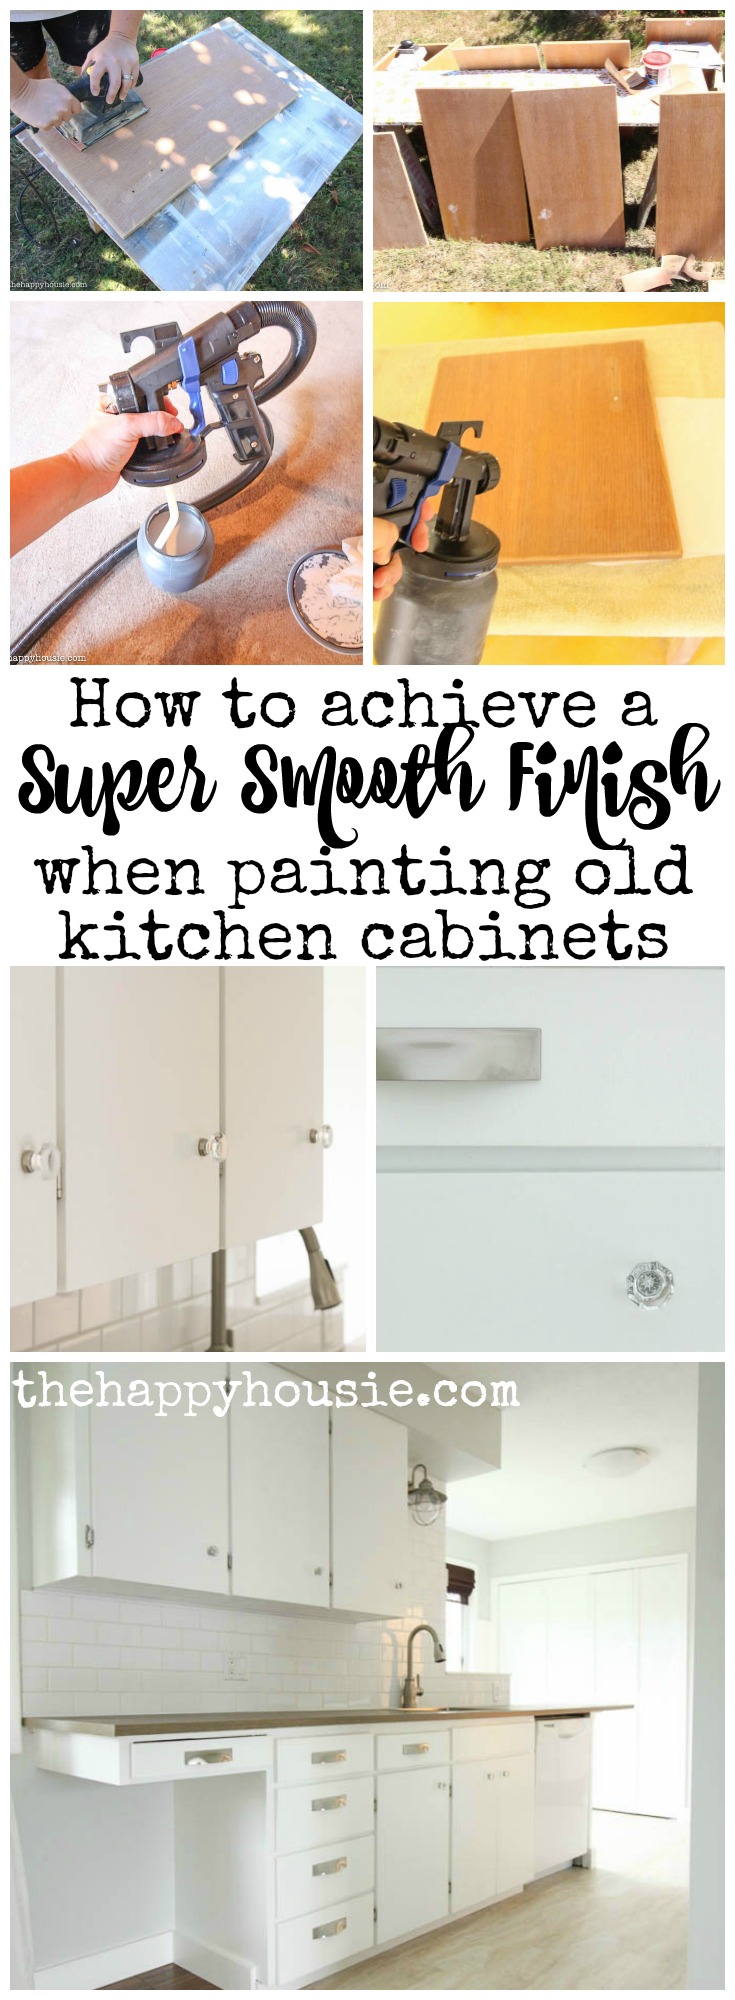 How To Achieve A Super Smooth Finish When Painting Old Kitchen